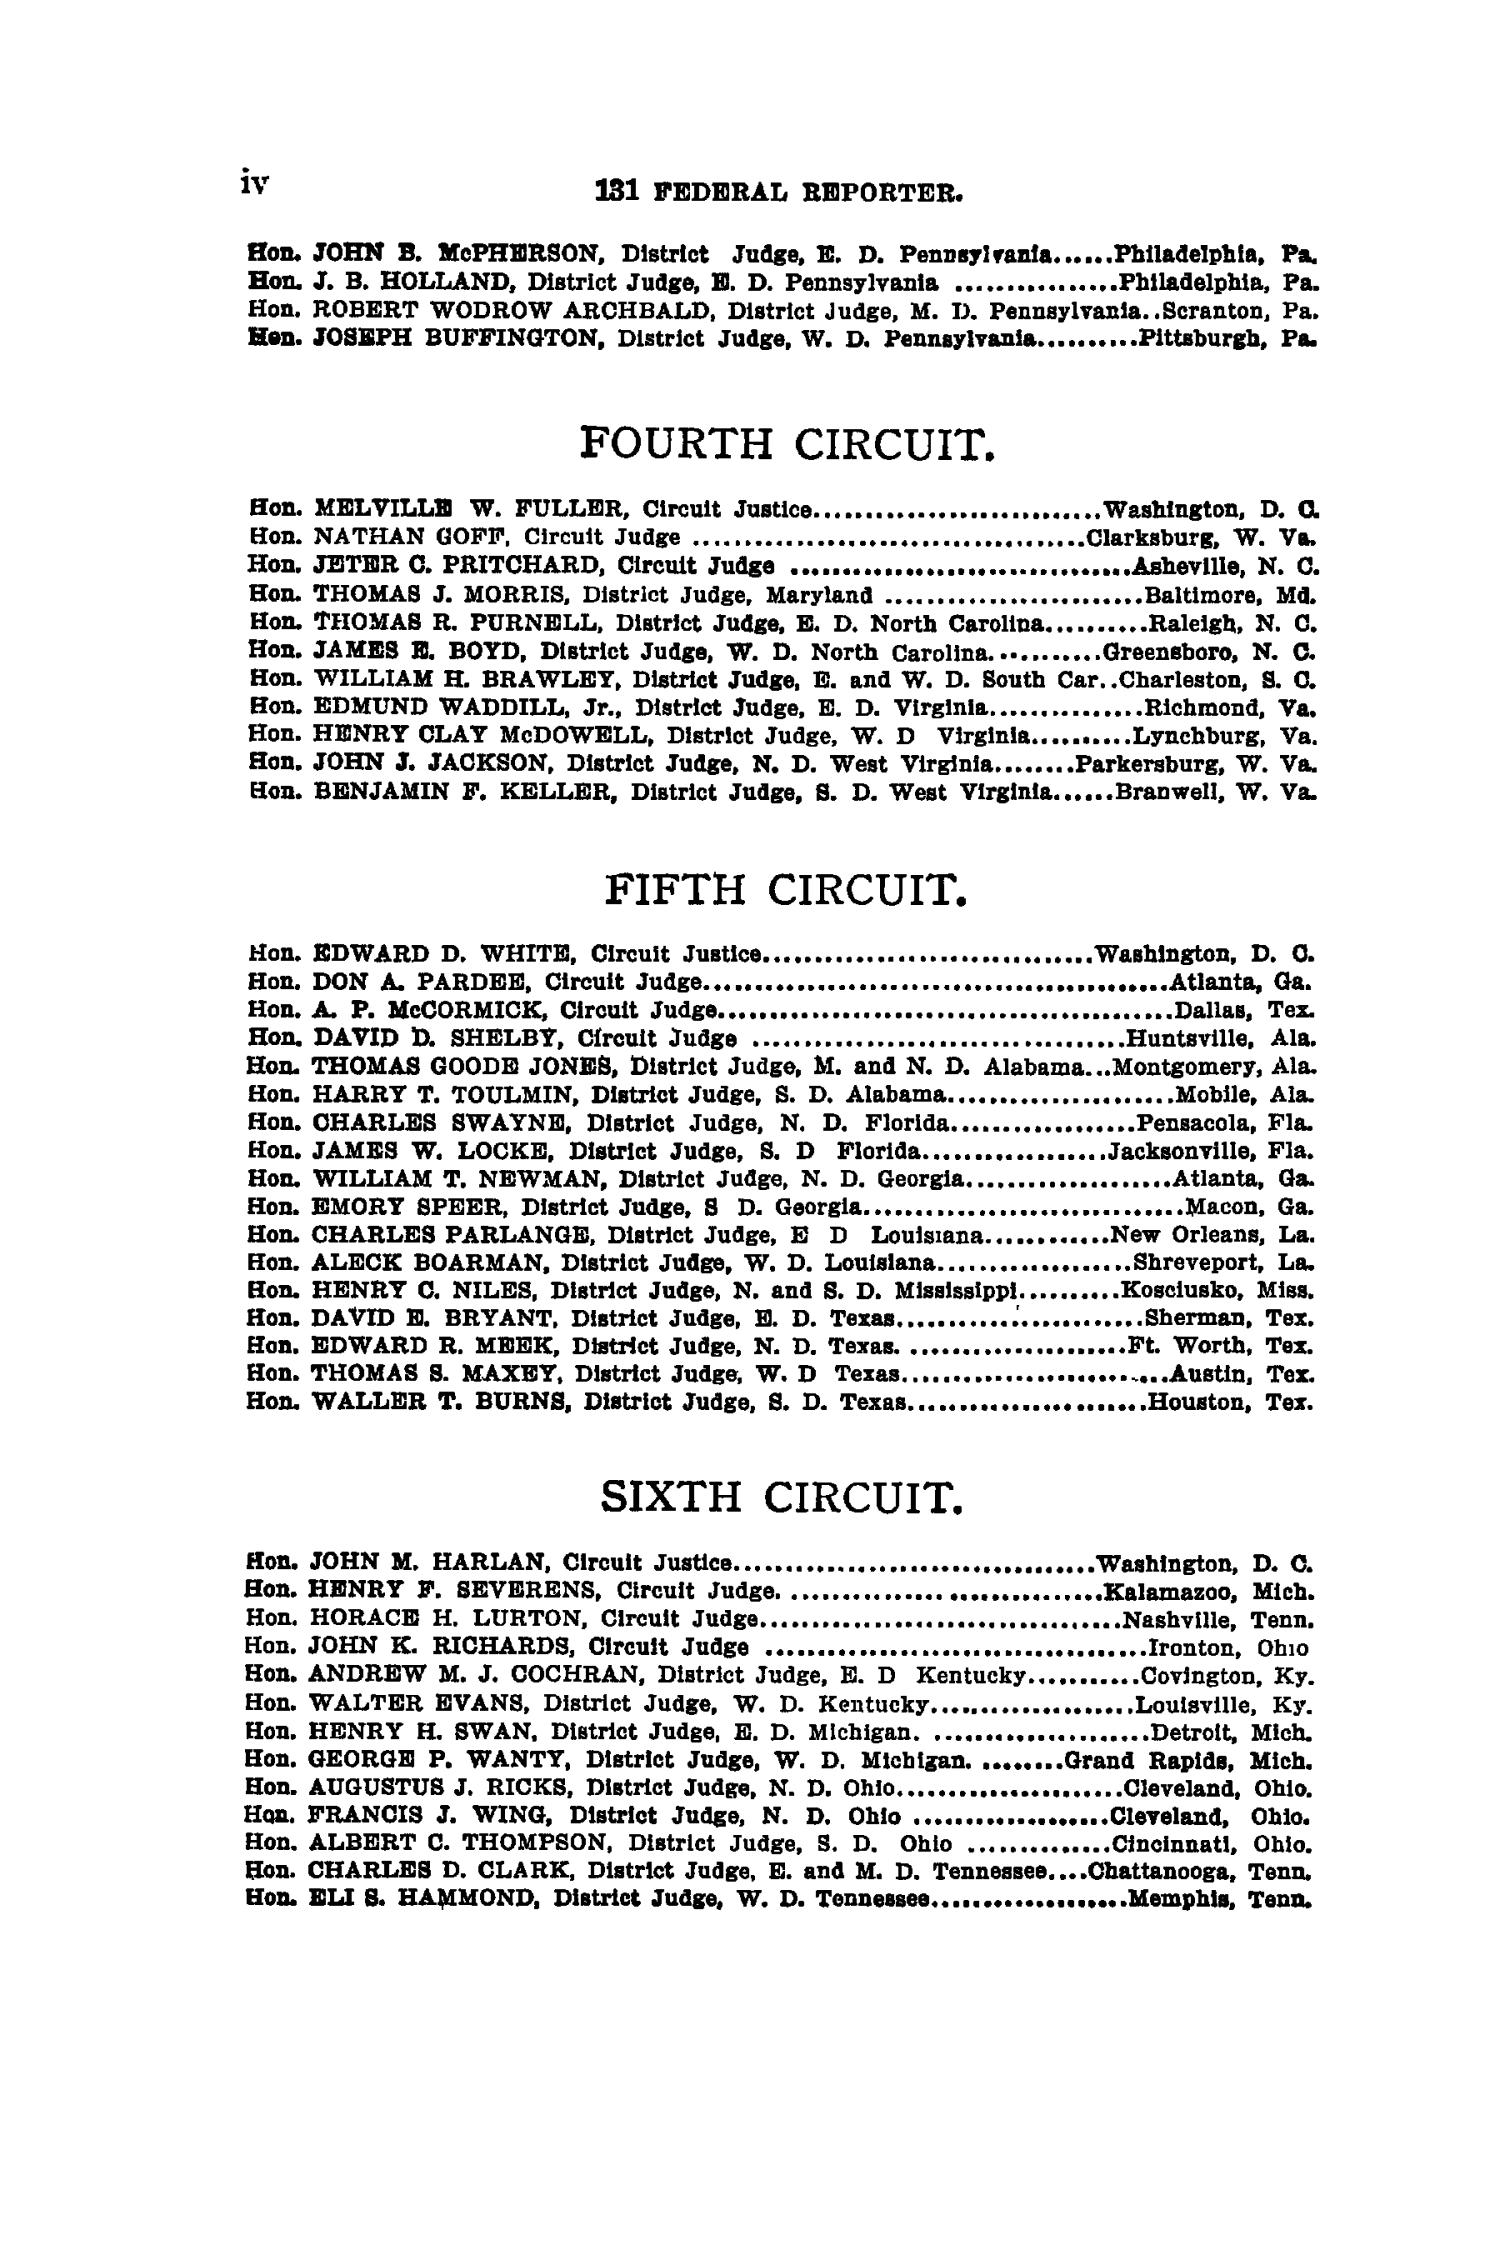 The Federal Reporter. Volume 131 Cases Argued and Determined in the Circuit Courts of Appeals and Circuit and District Courts of the United States. September-October, 1904.
                                                
                                                    IV
                                                